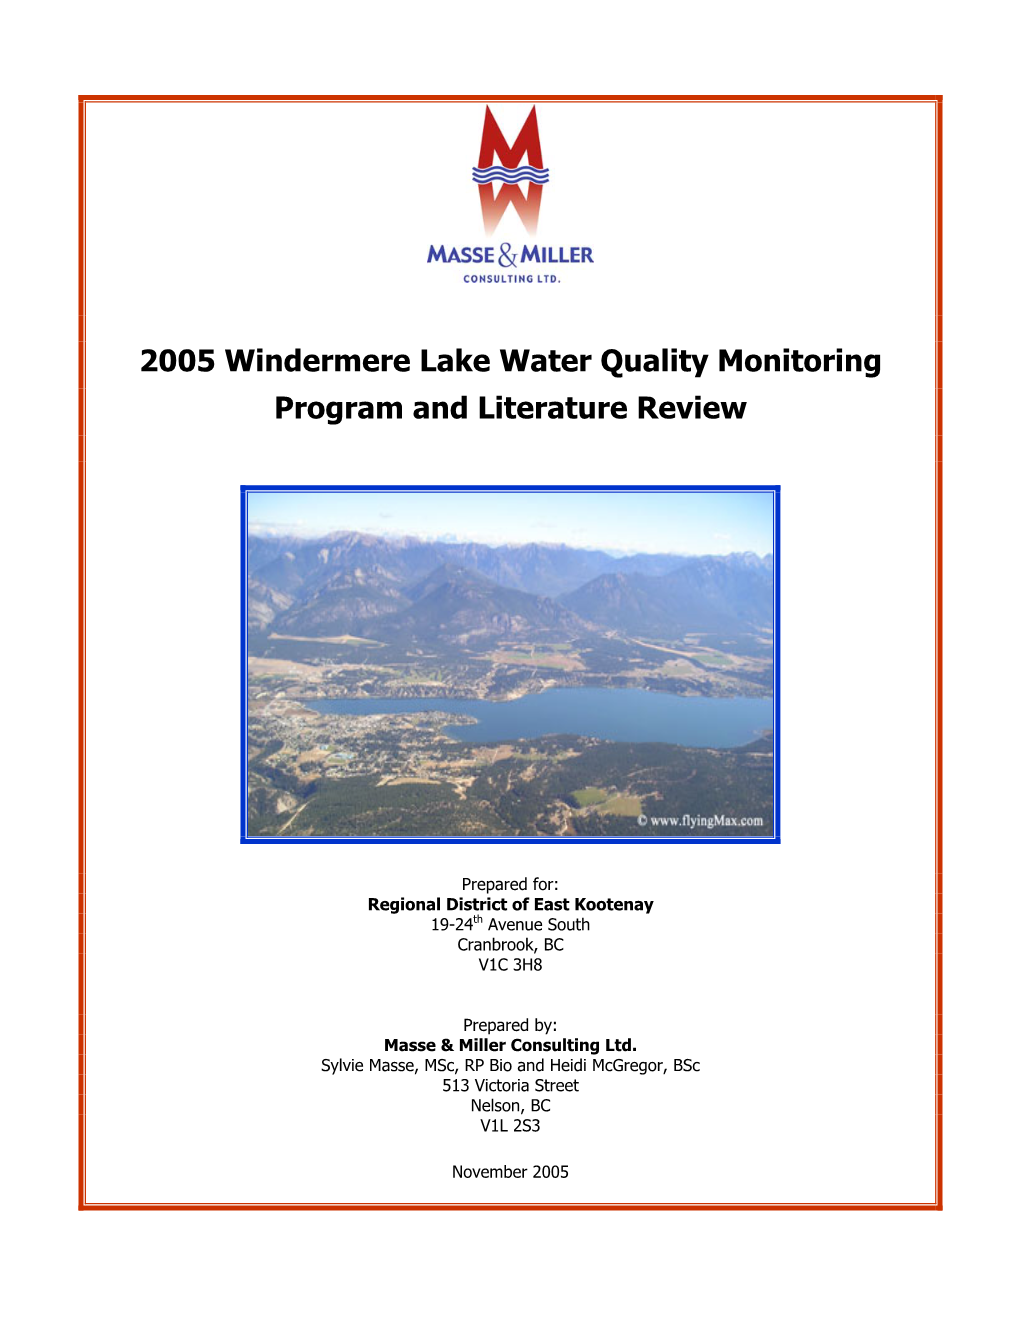 2005 Windermere Lake Water Quality Monitoring Program and Literature Review